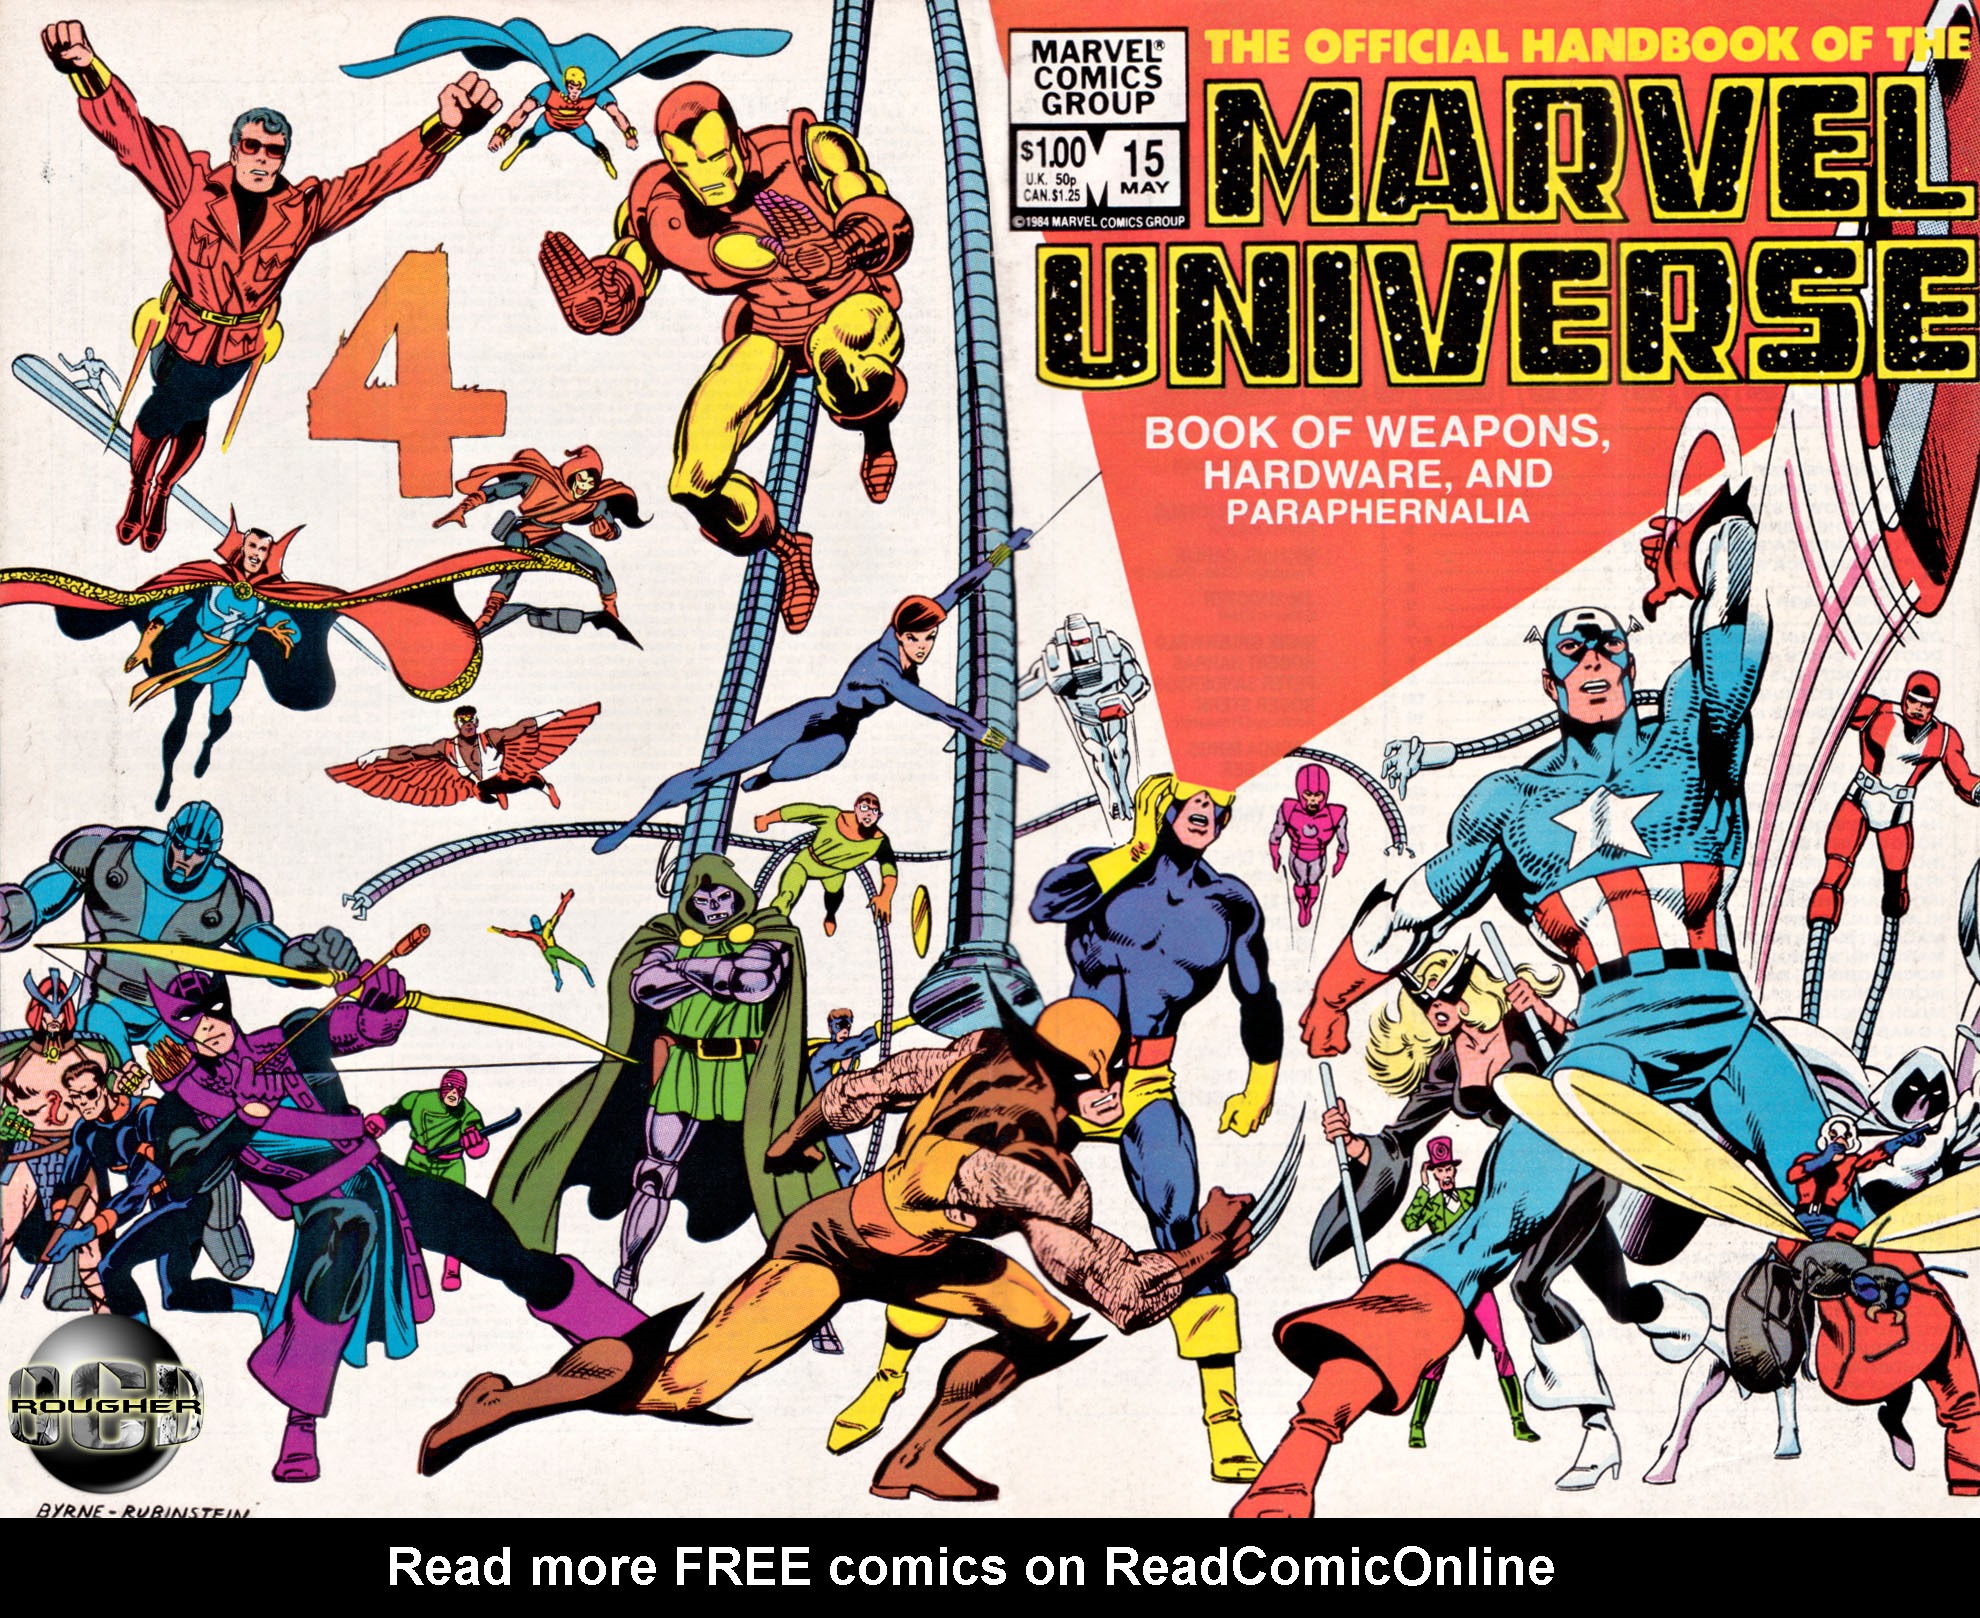 Read online The Official Handbook of the Marvel Universe comic -  Issue #15 - 1